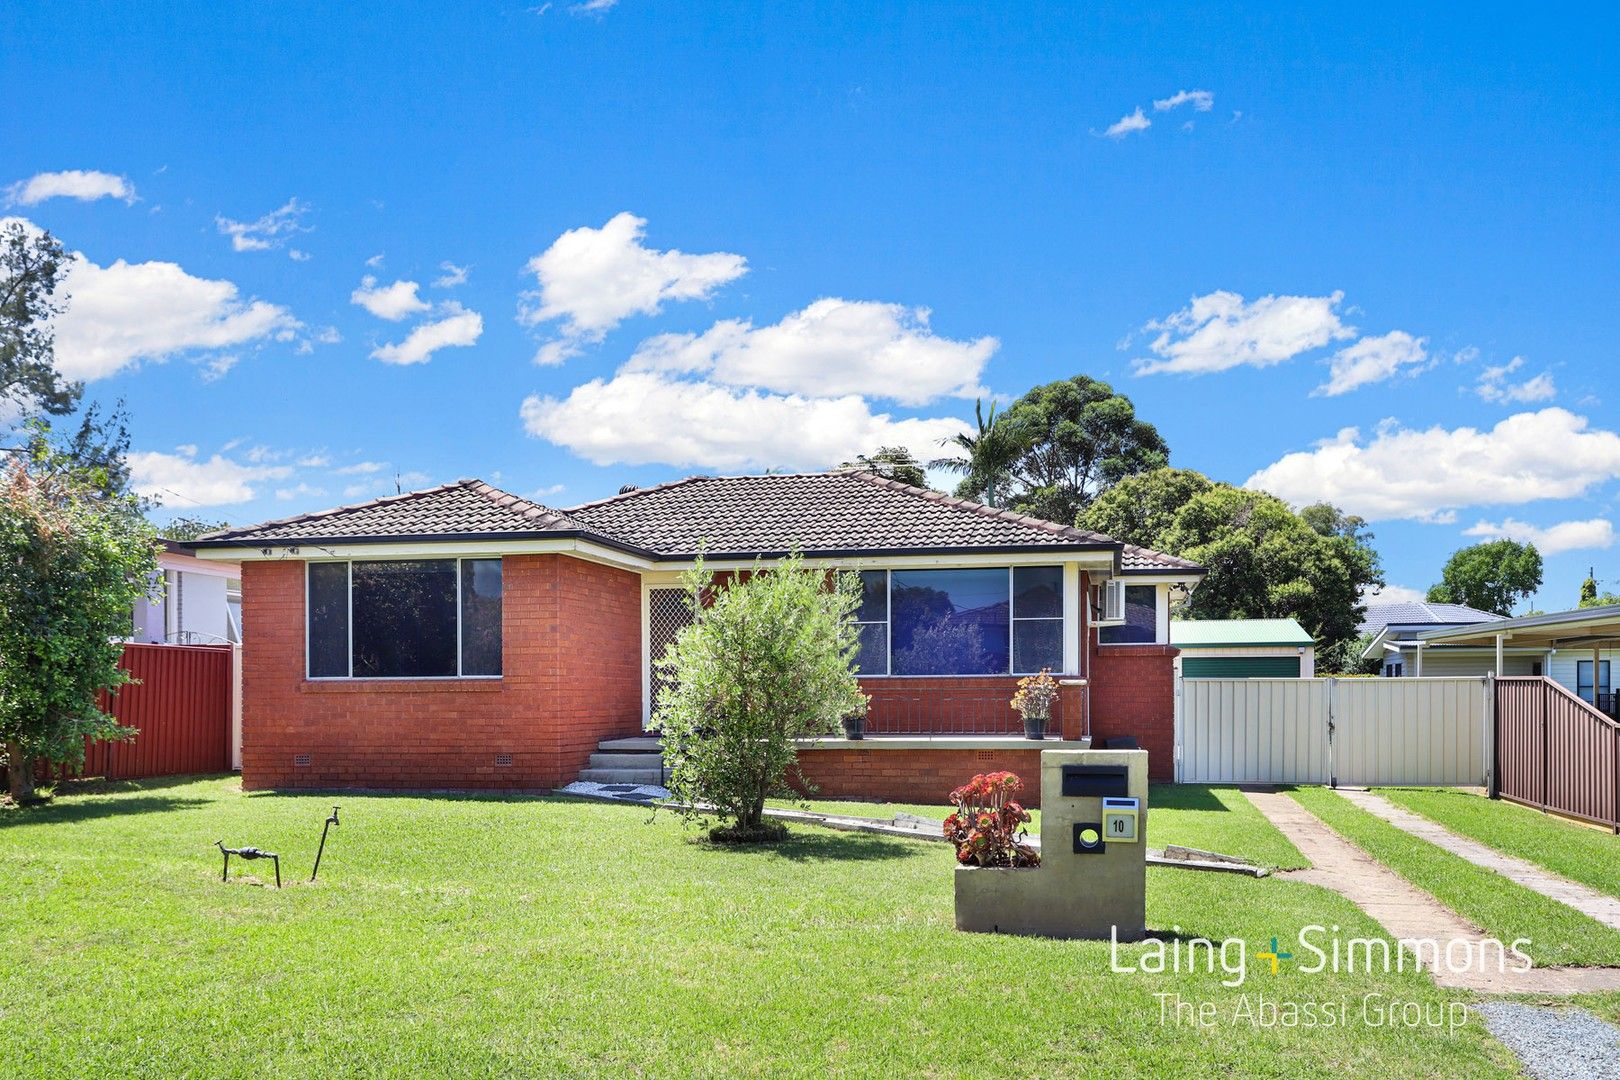 3 bedrooms House in 10 Beresford Street ST MARYS NSW, 2760